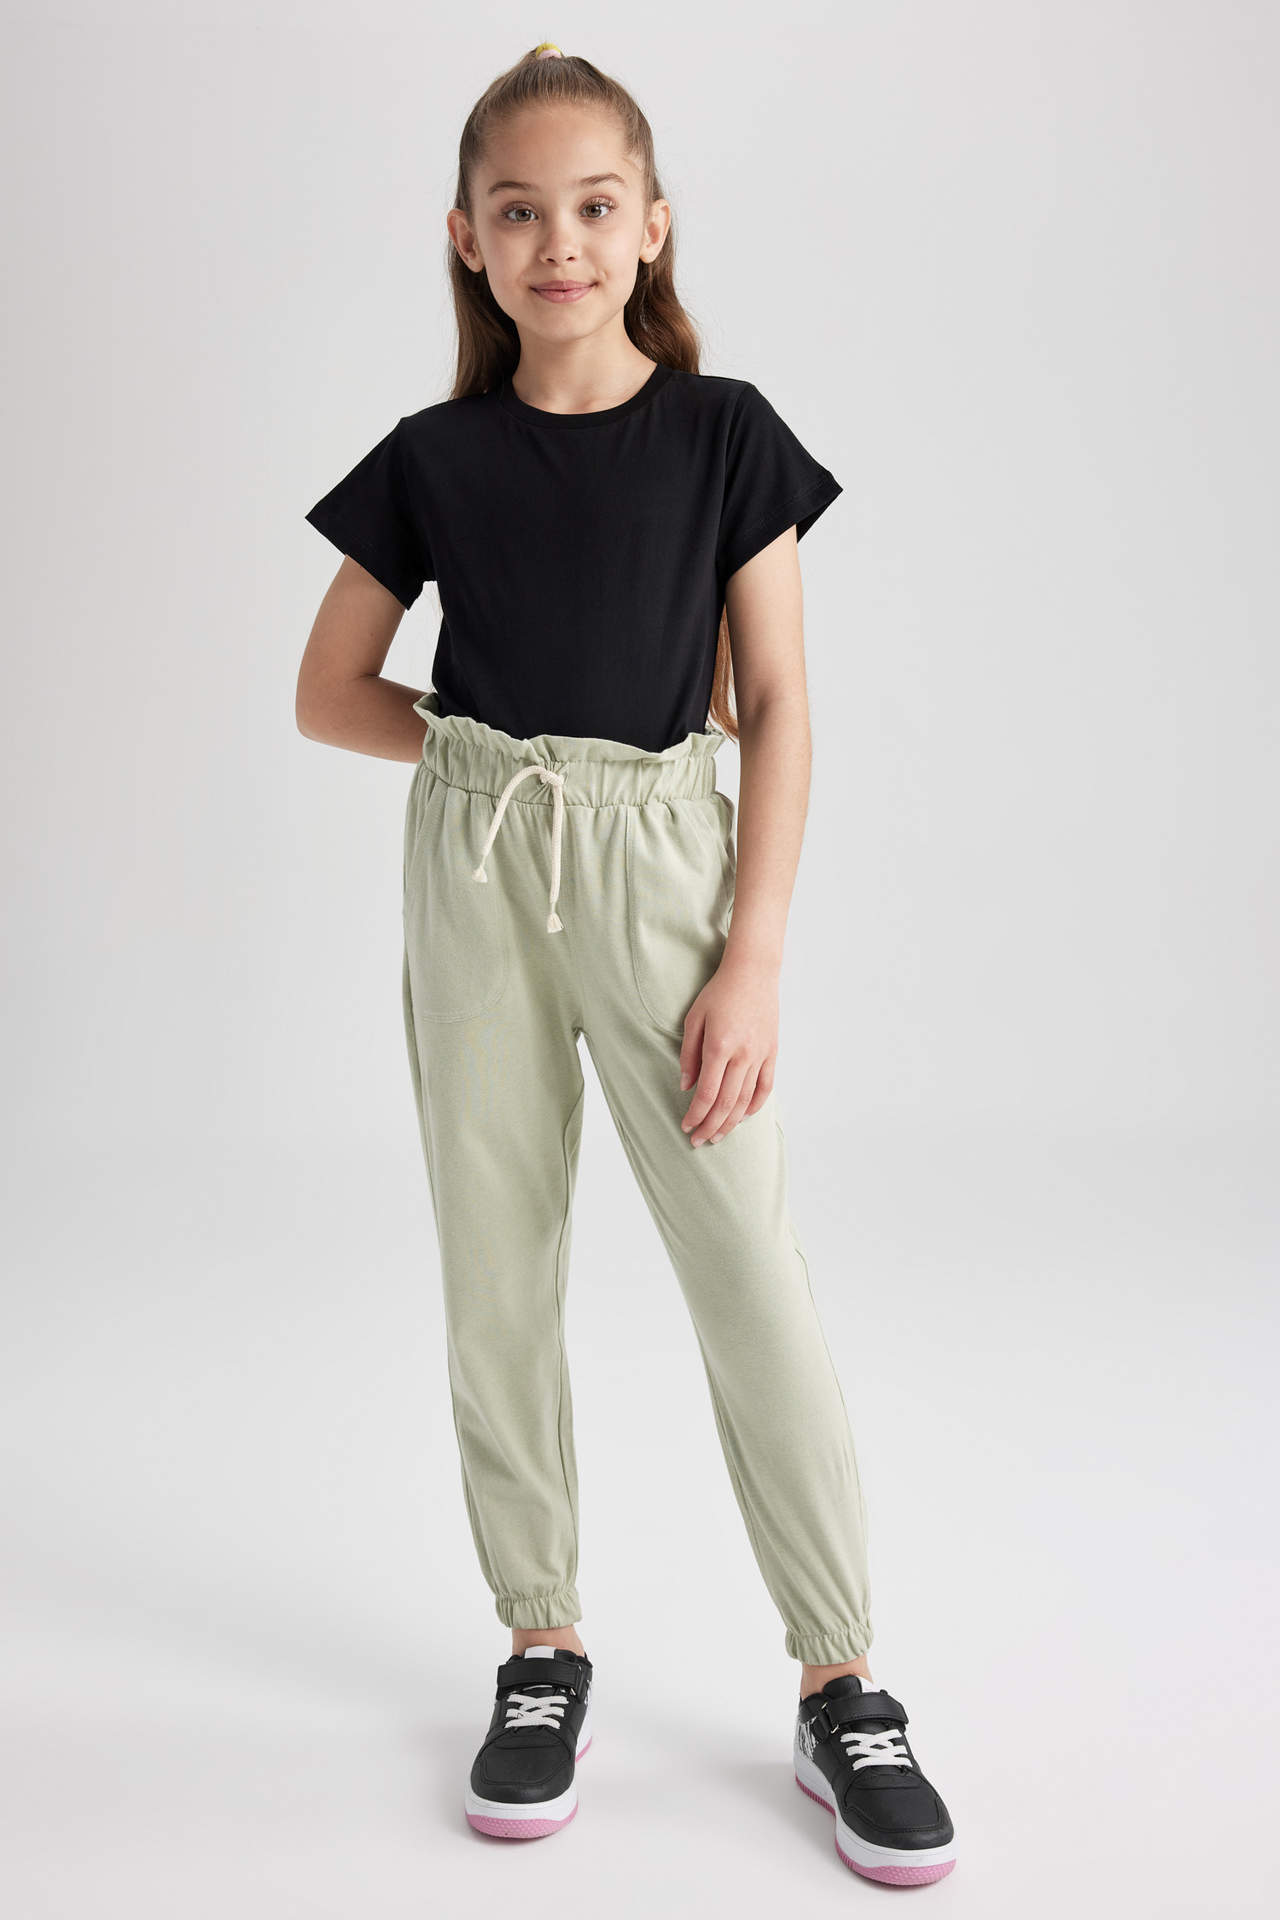 DEFACTO Girl Jogger Combed Cotton Pants